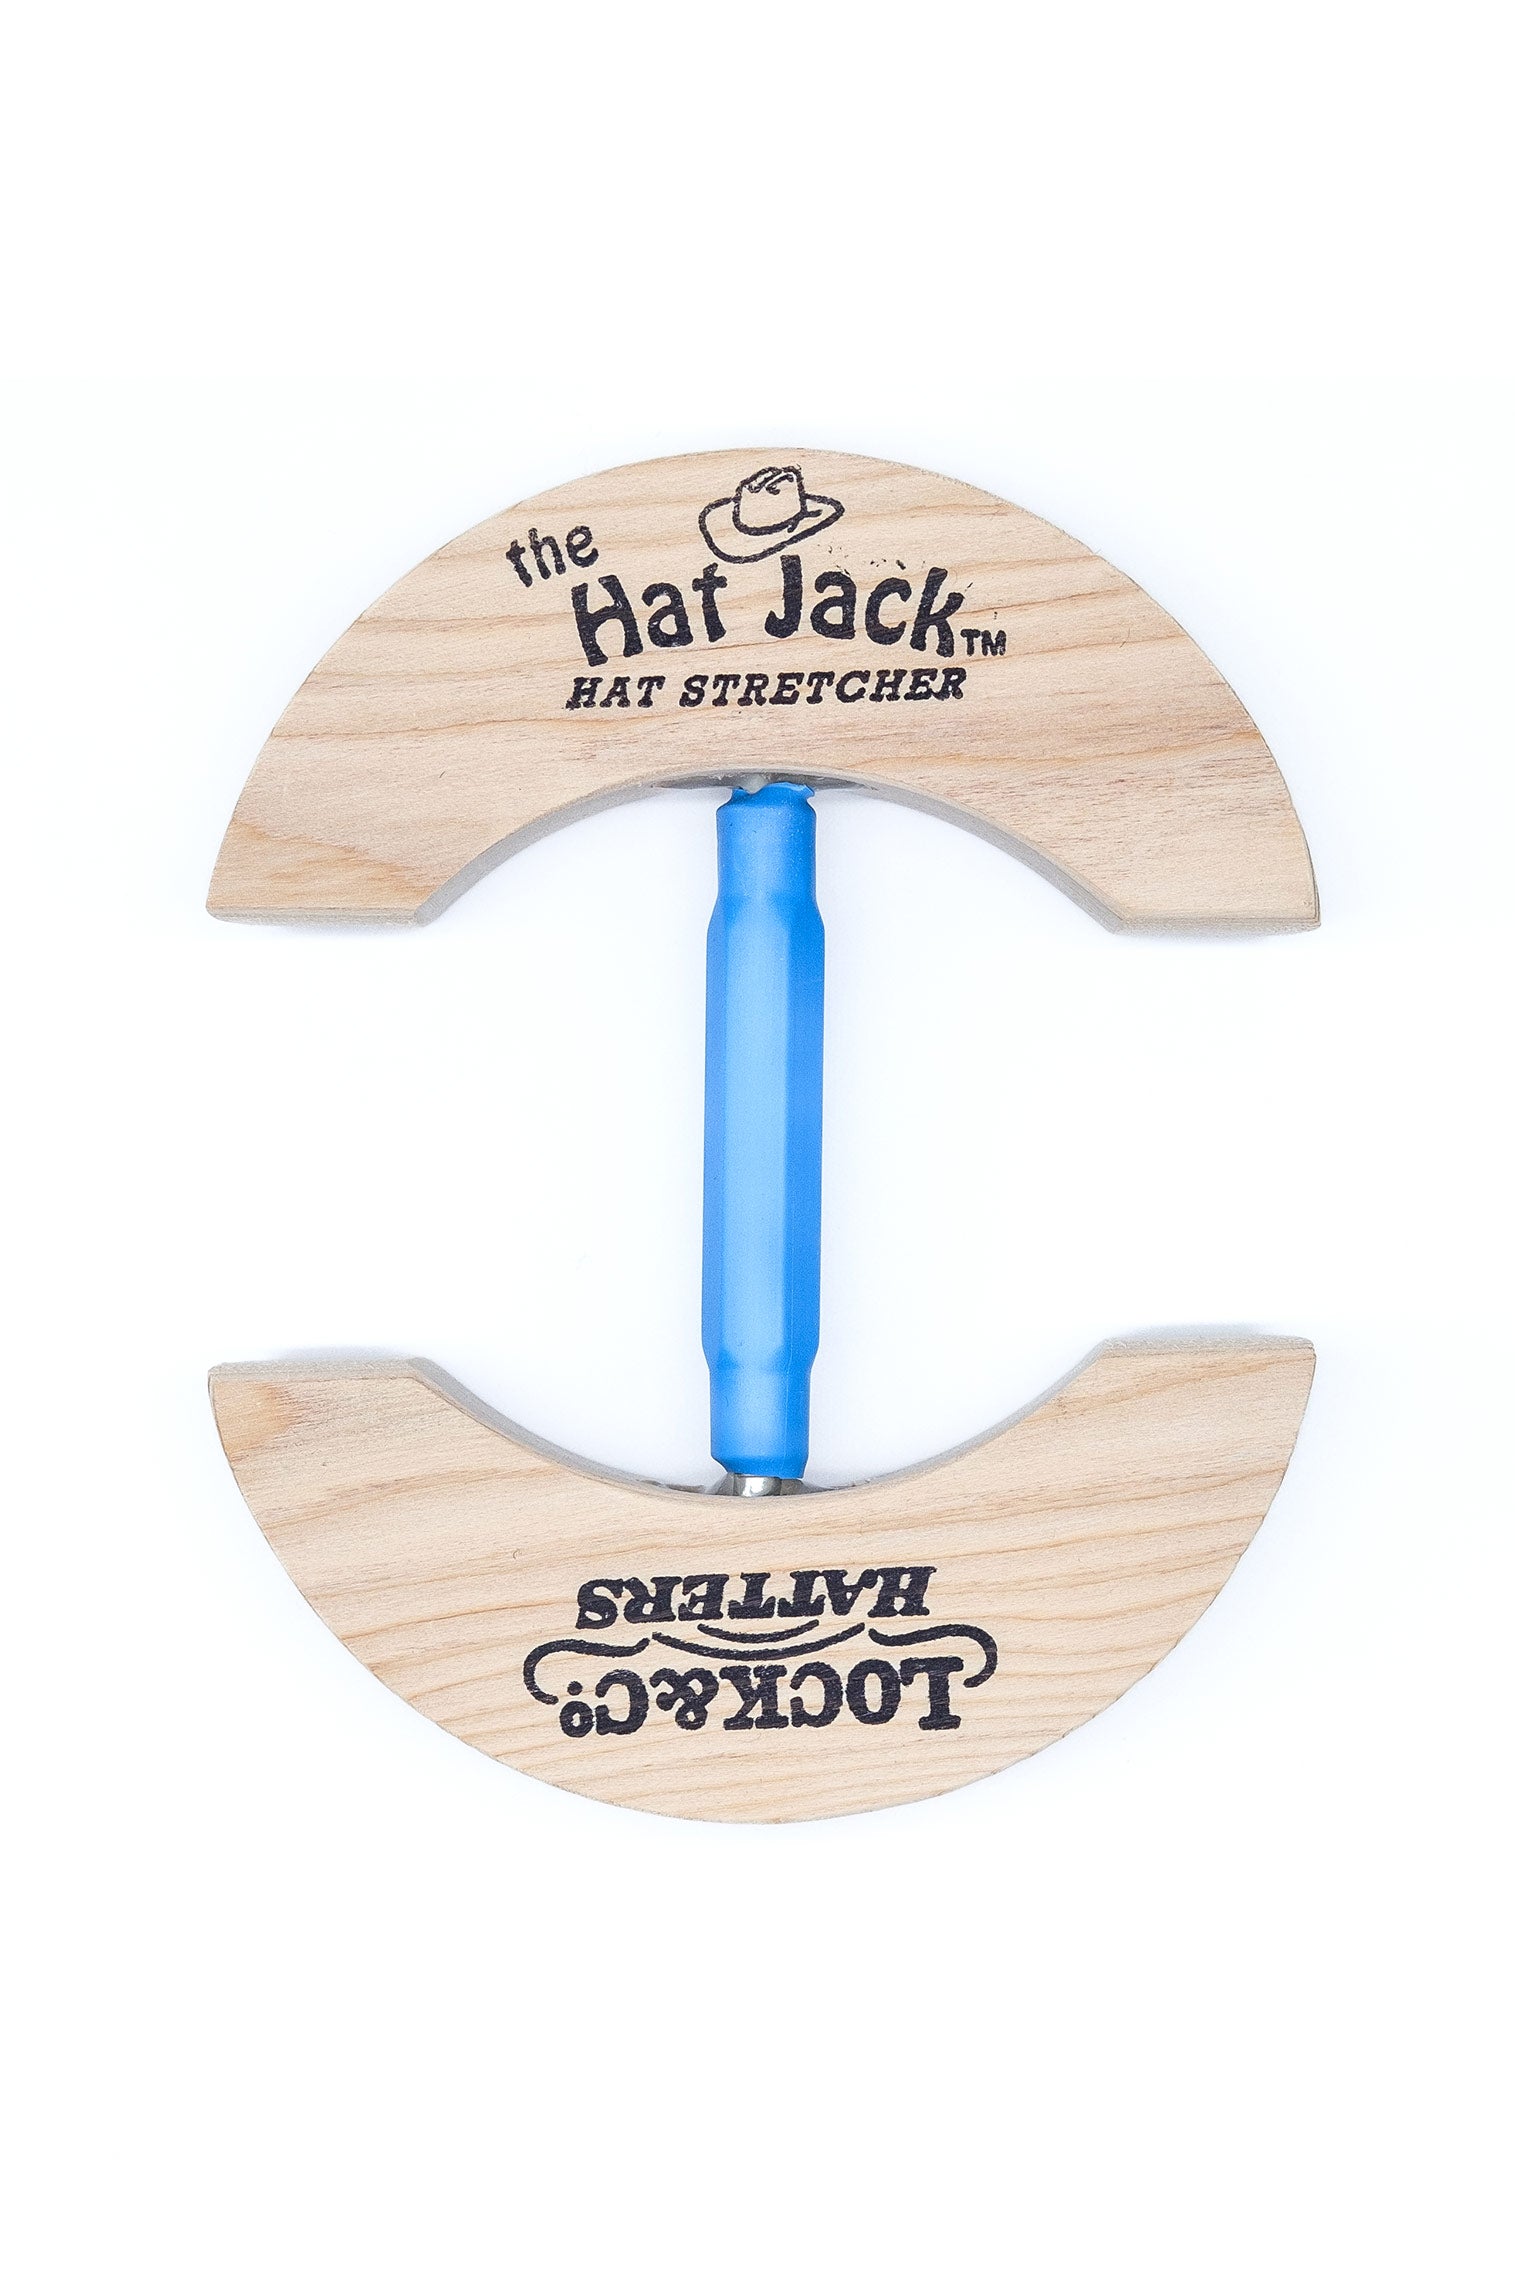 Hat Jack - Father's Day Gift Guide - Lock & Co. Hatters London UK